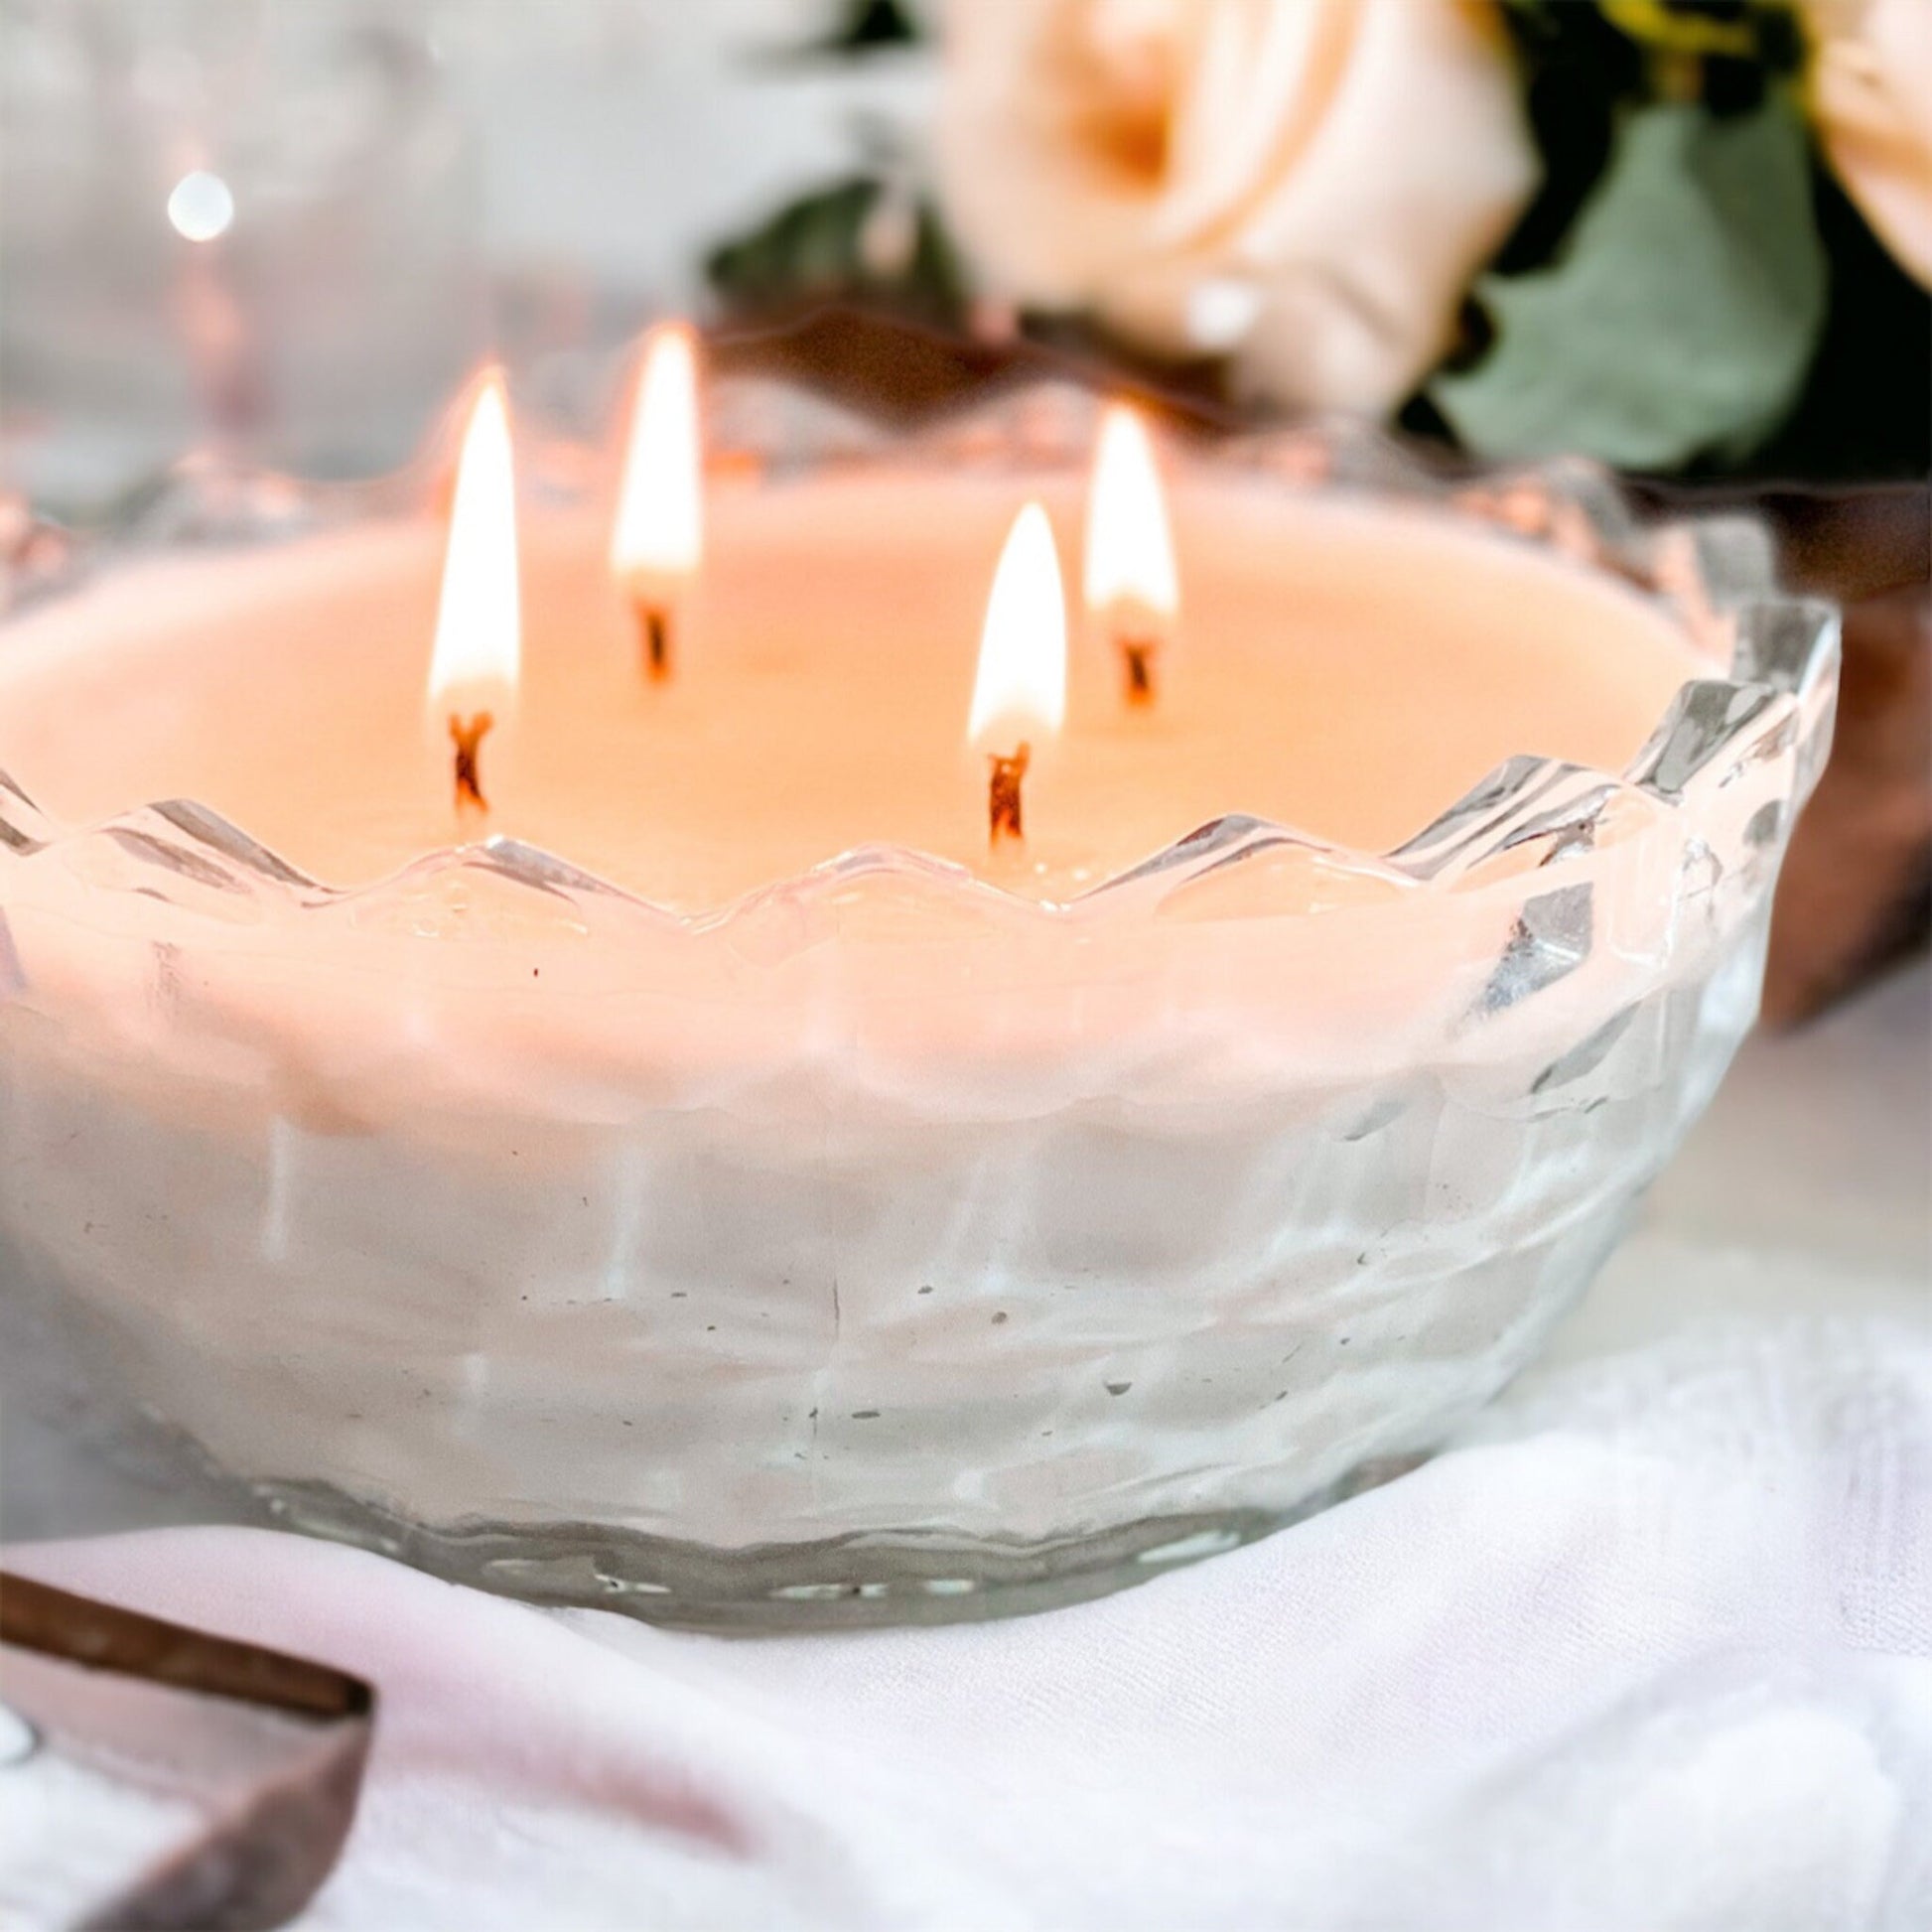 Soy Candle in Vintage Candy Dish